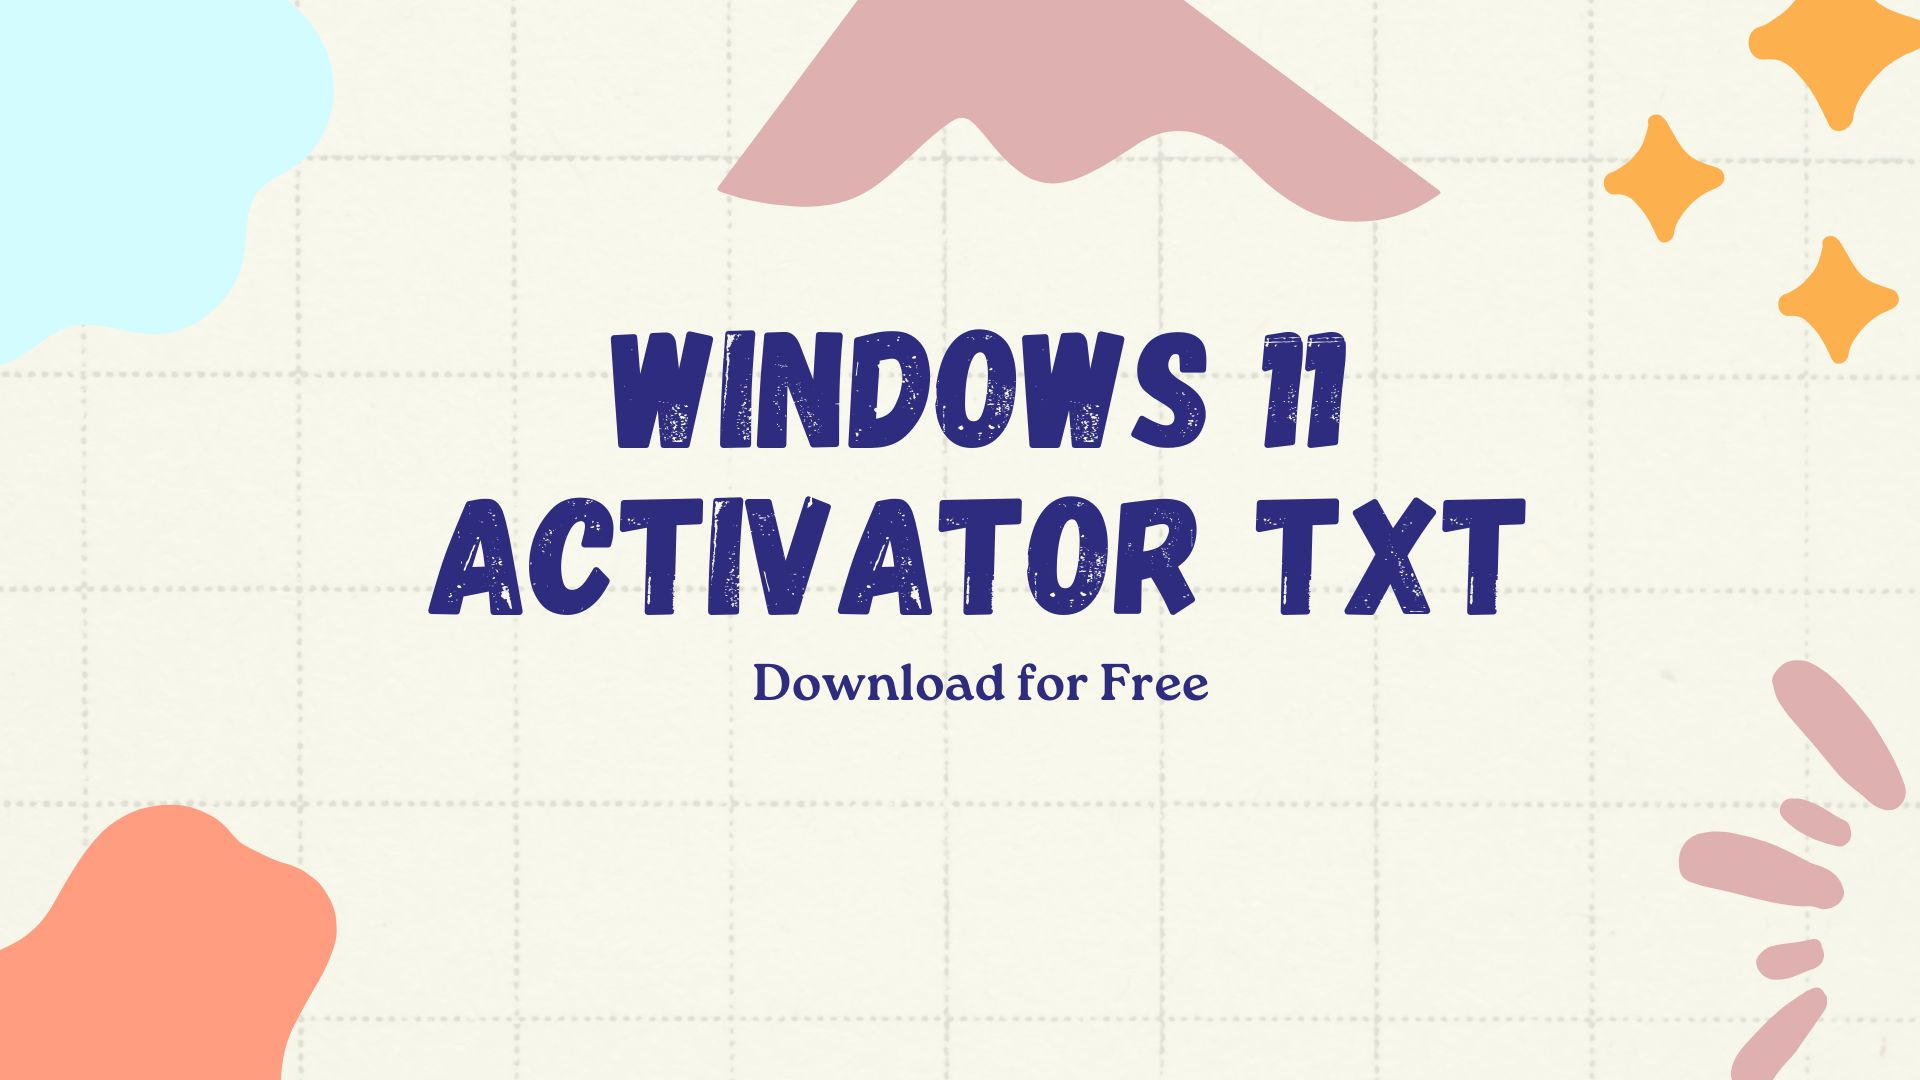 Windows 11 Activator TXT Download for Free